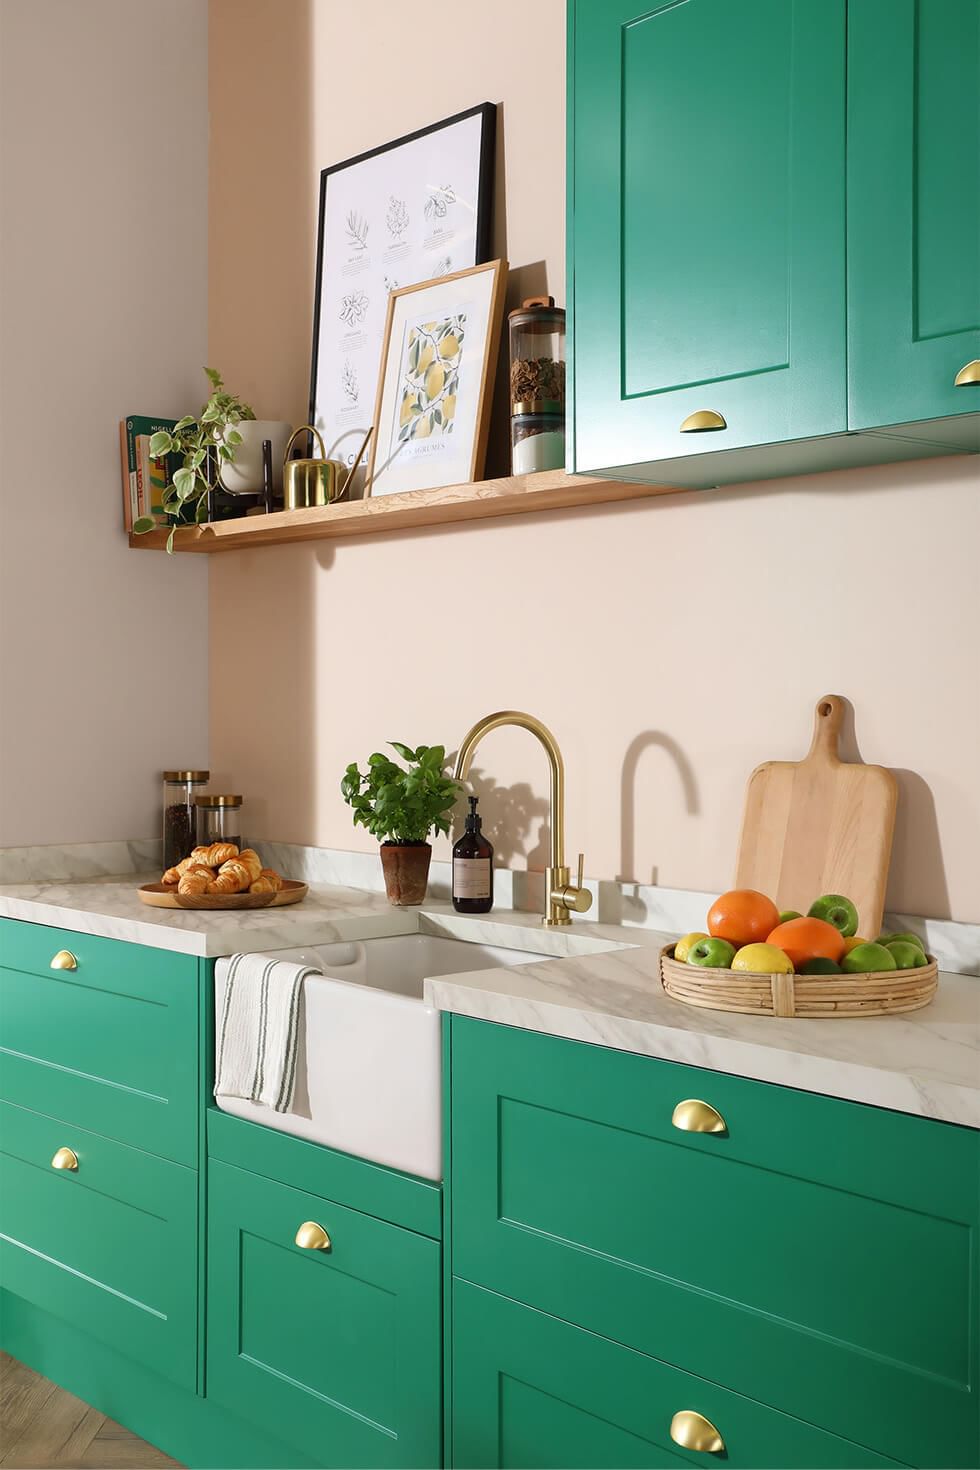 Vibrant green kitchen cabinets with gold hardware